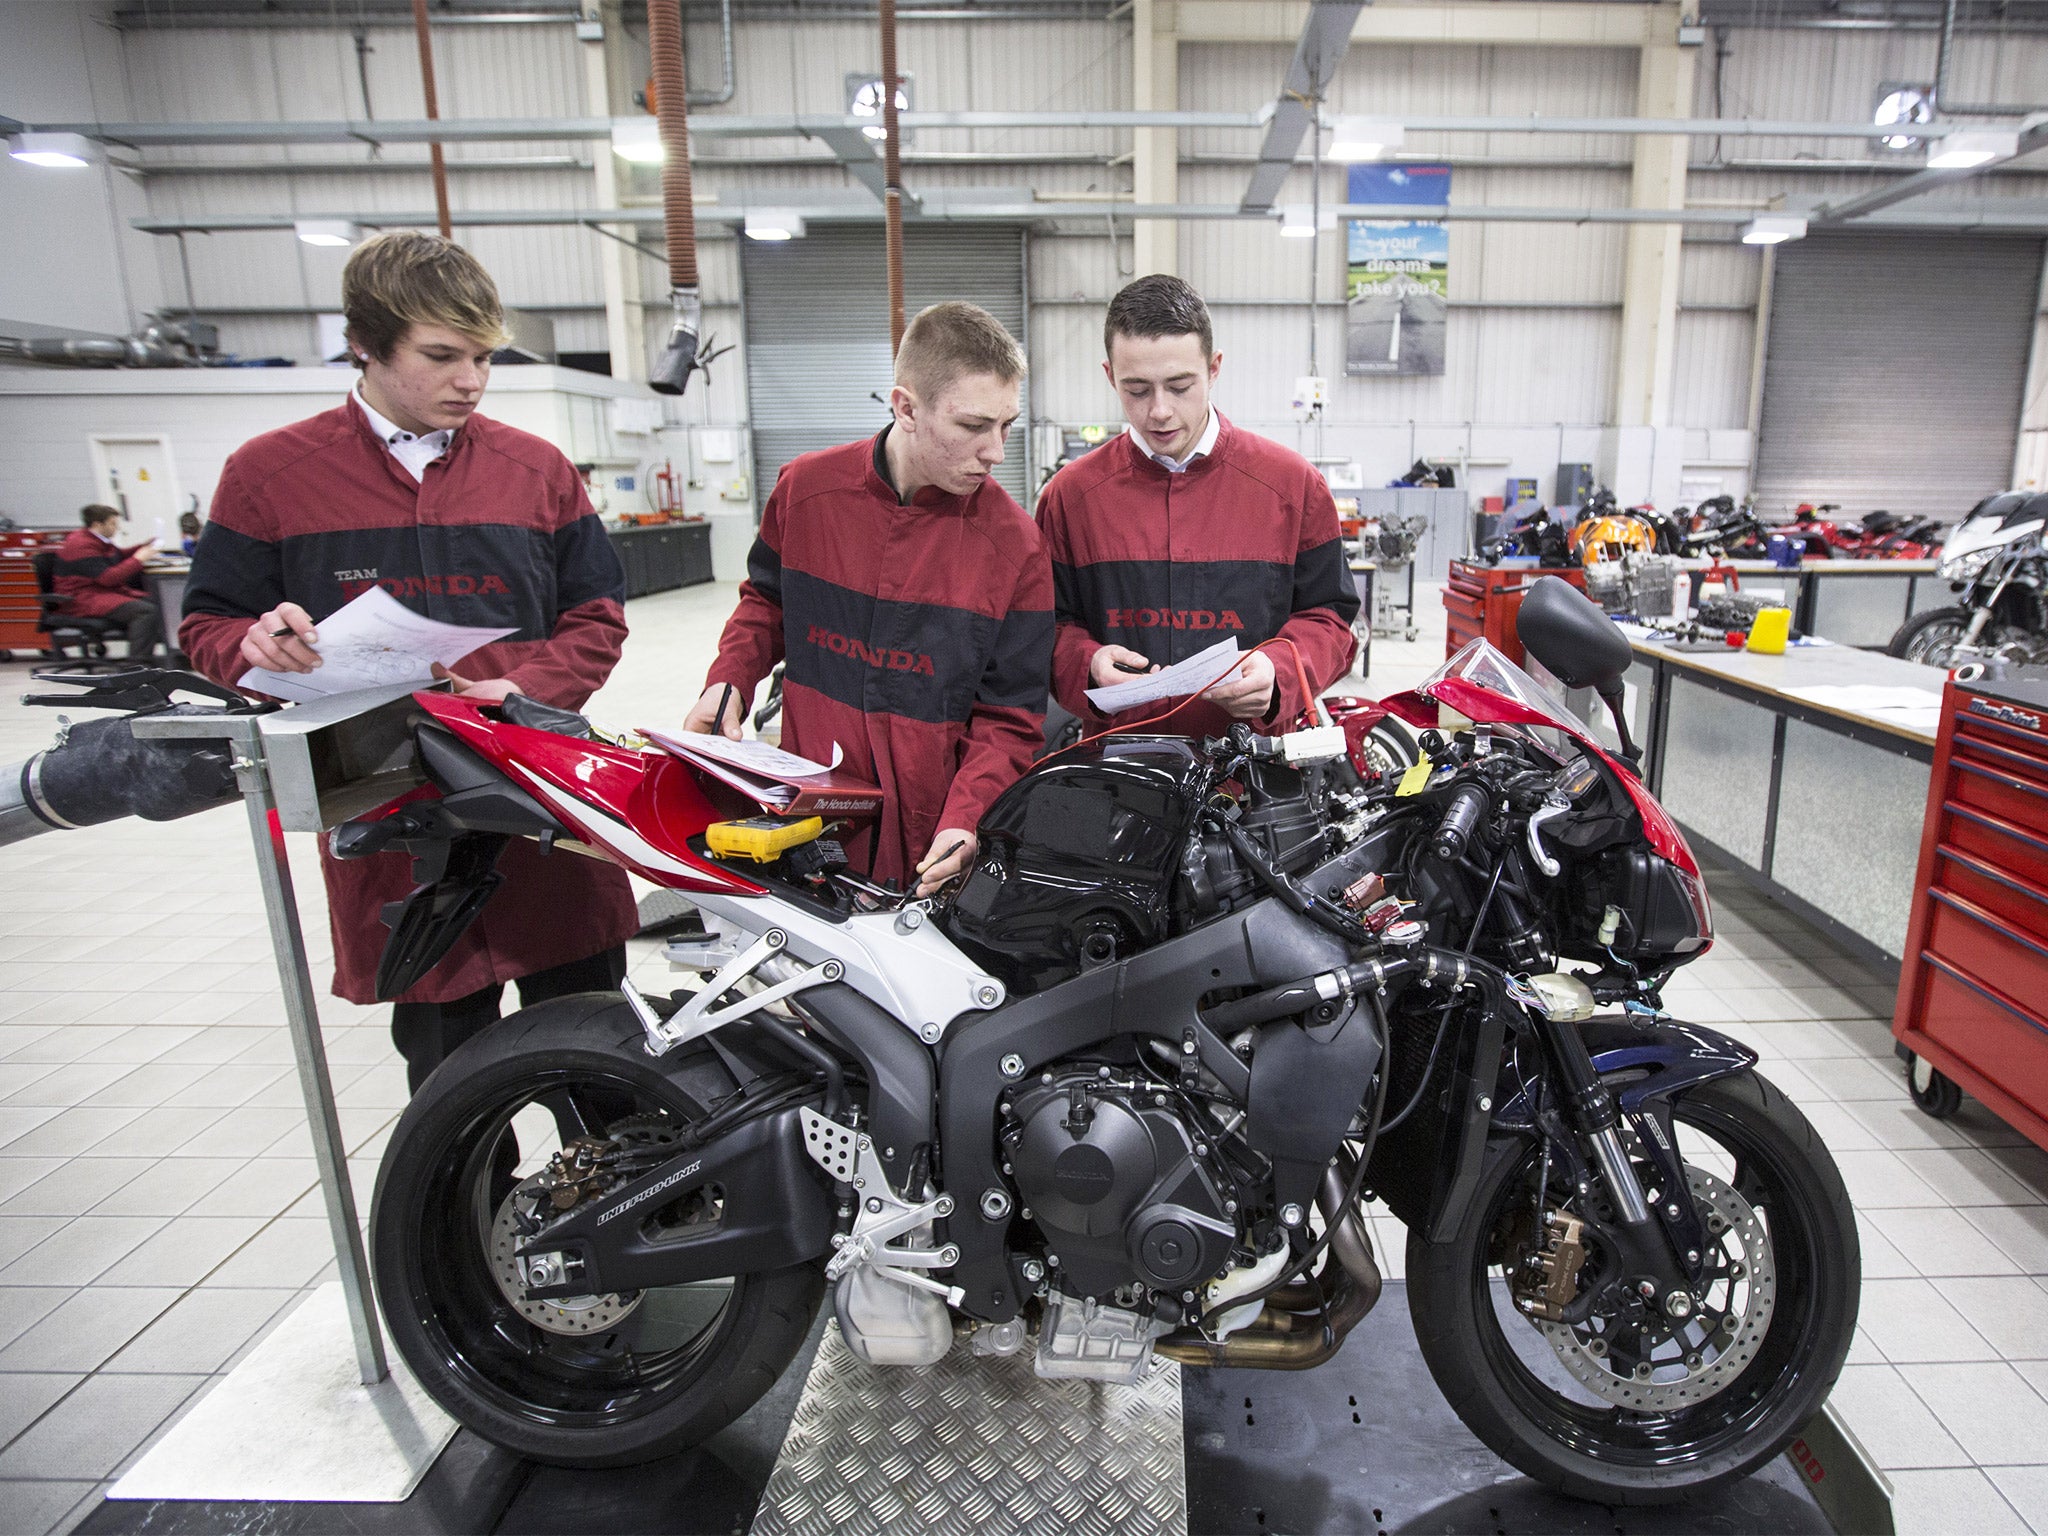 Kick started: young adults training as apprentices at the Honda Institute